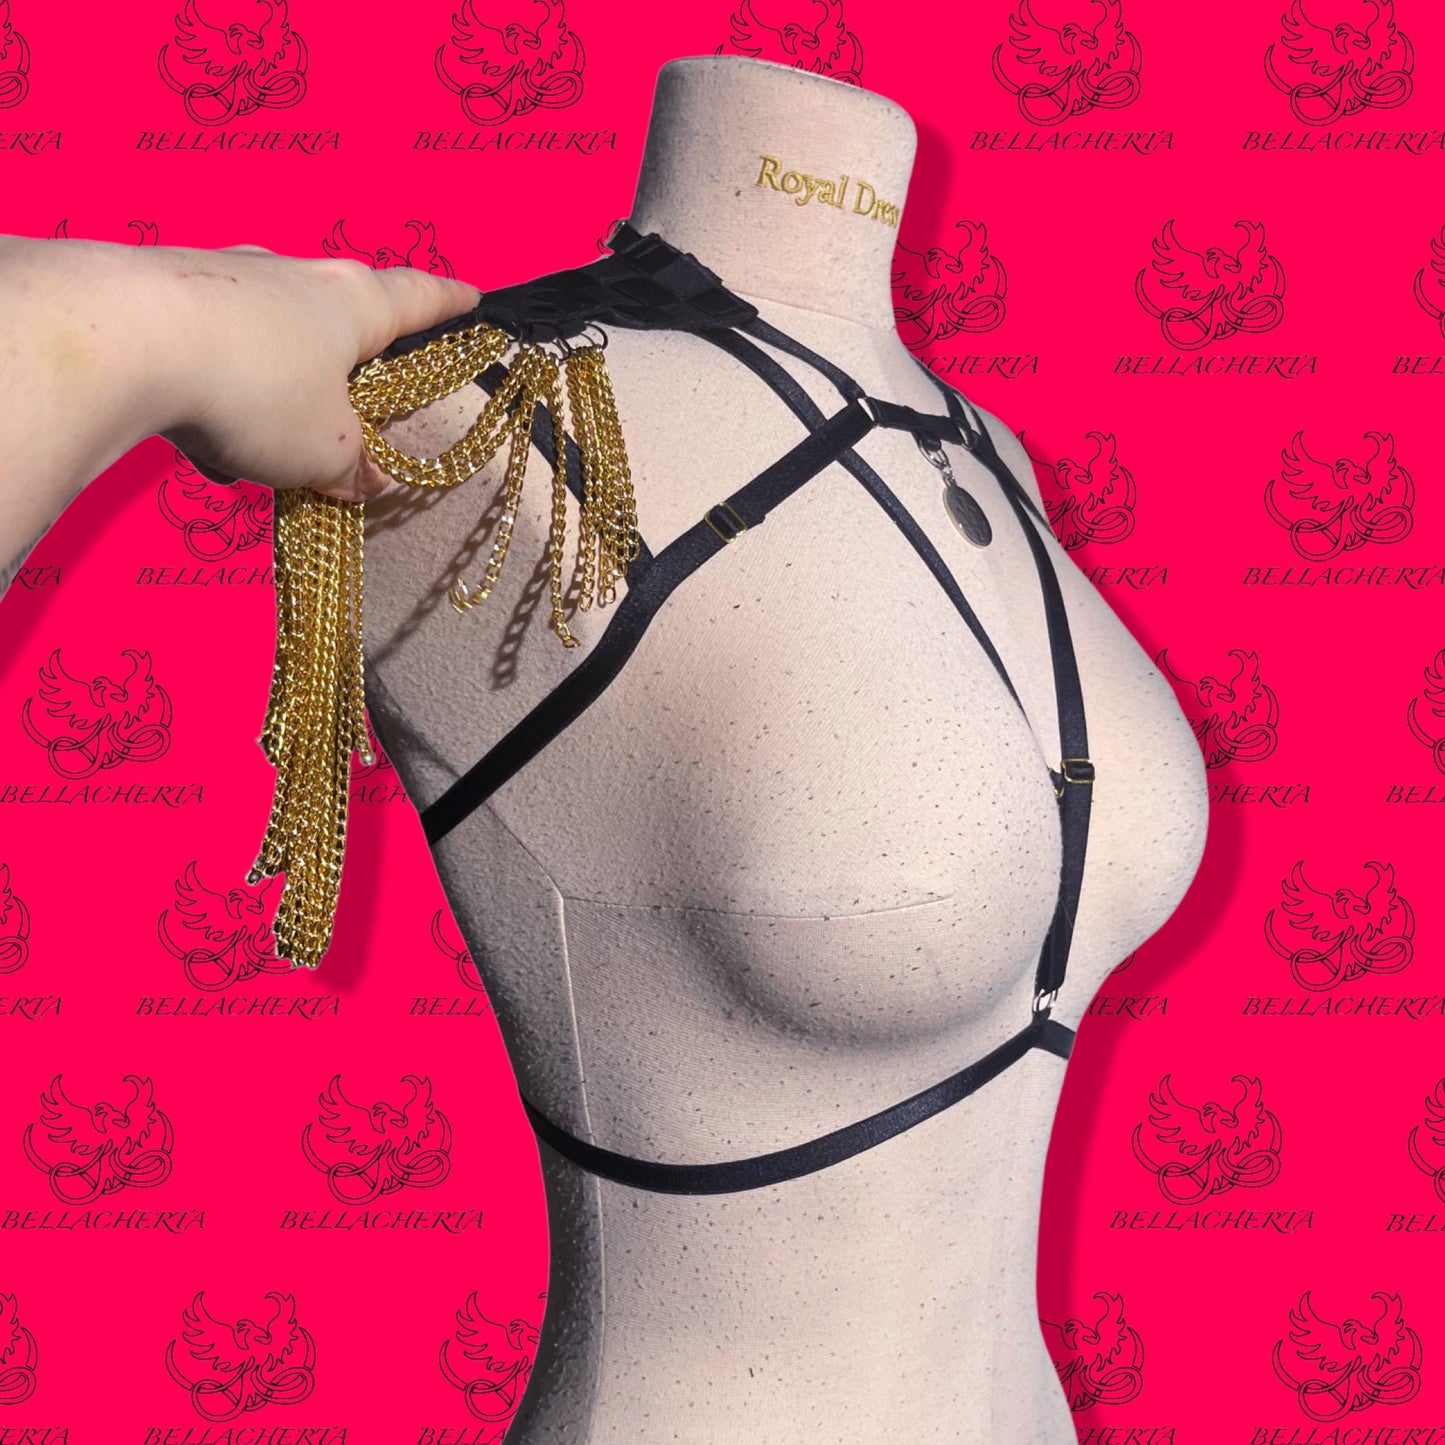 Chainlink and Mesh Lingerie Set